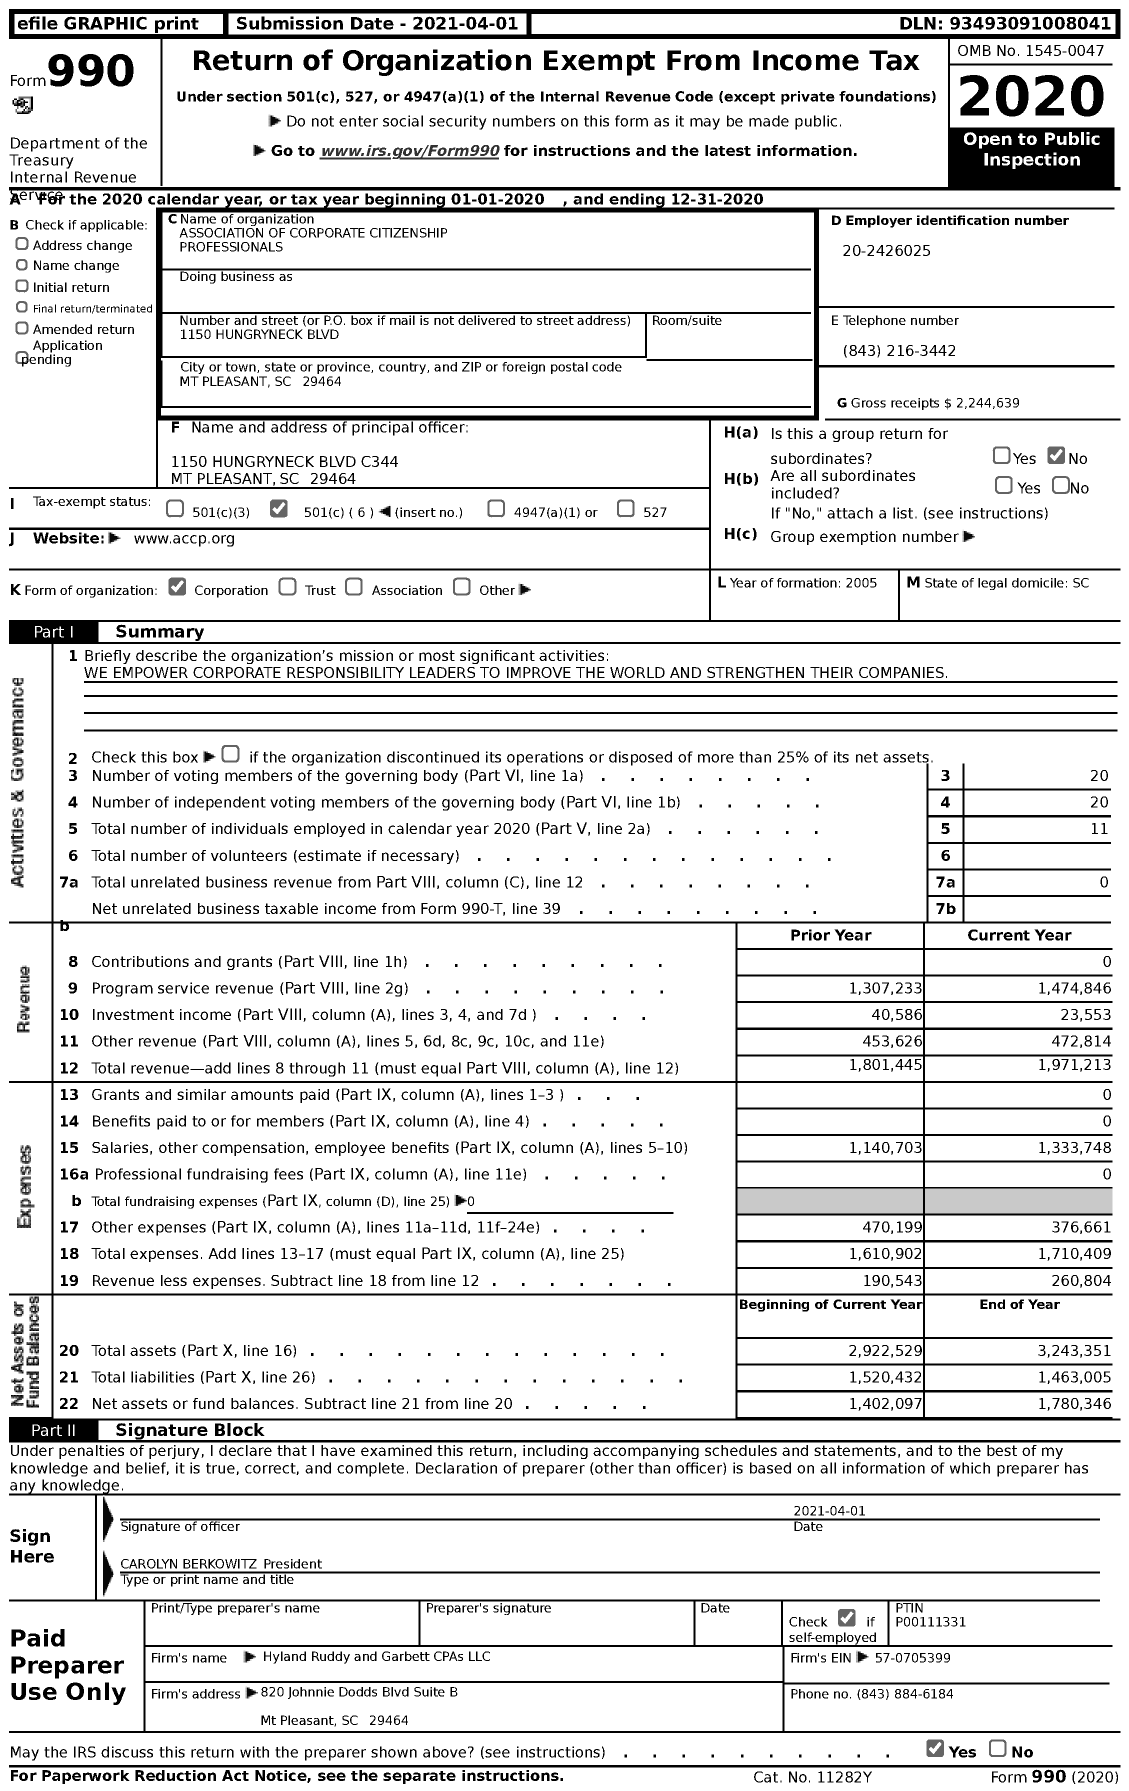 Image of first page of 2020 Form 990 for Association of Corporate Citizenship Professionals (ACCP)